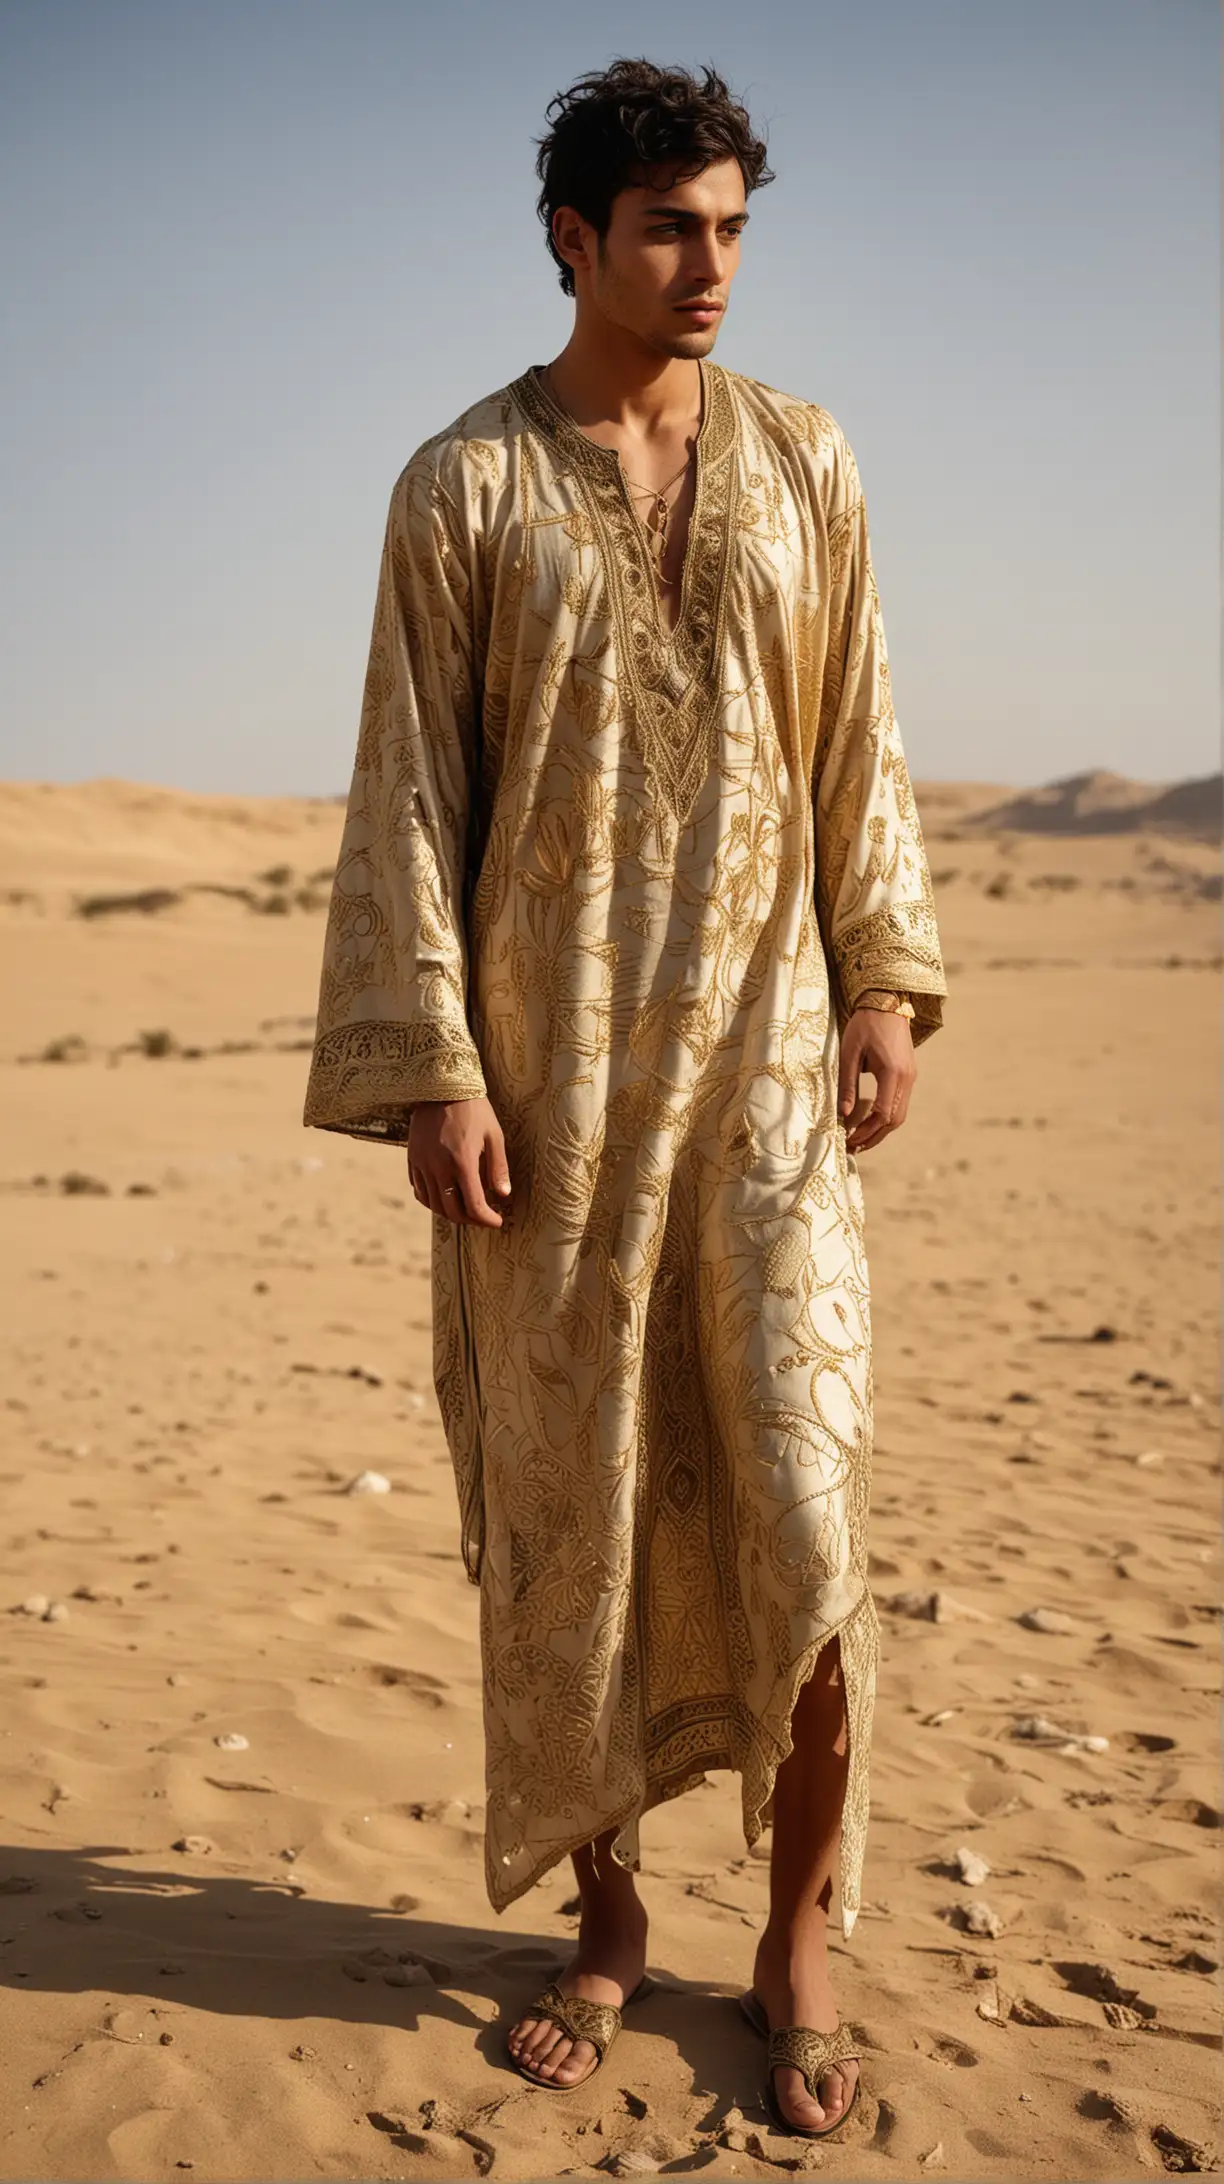 Muscular Man in Torn GoldEmbroidered Kaftan Poses Dramatically in Desert Sunlight